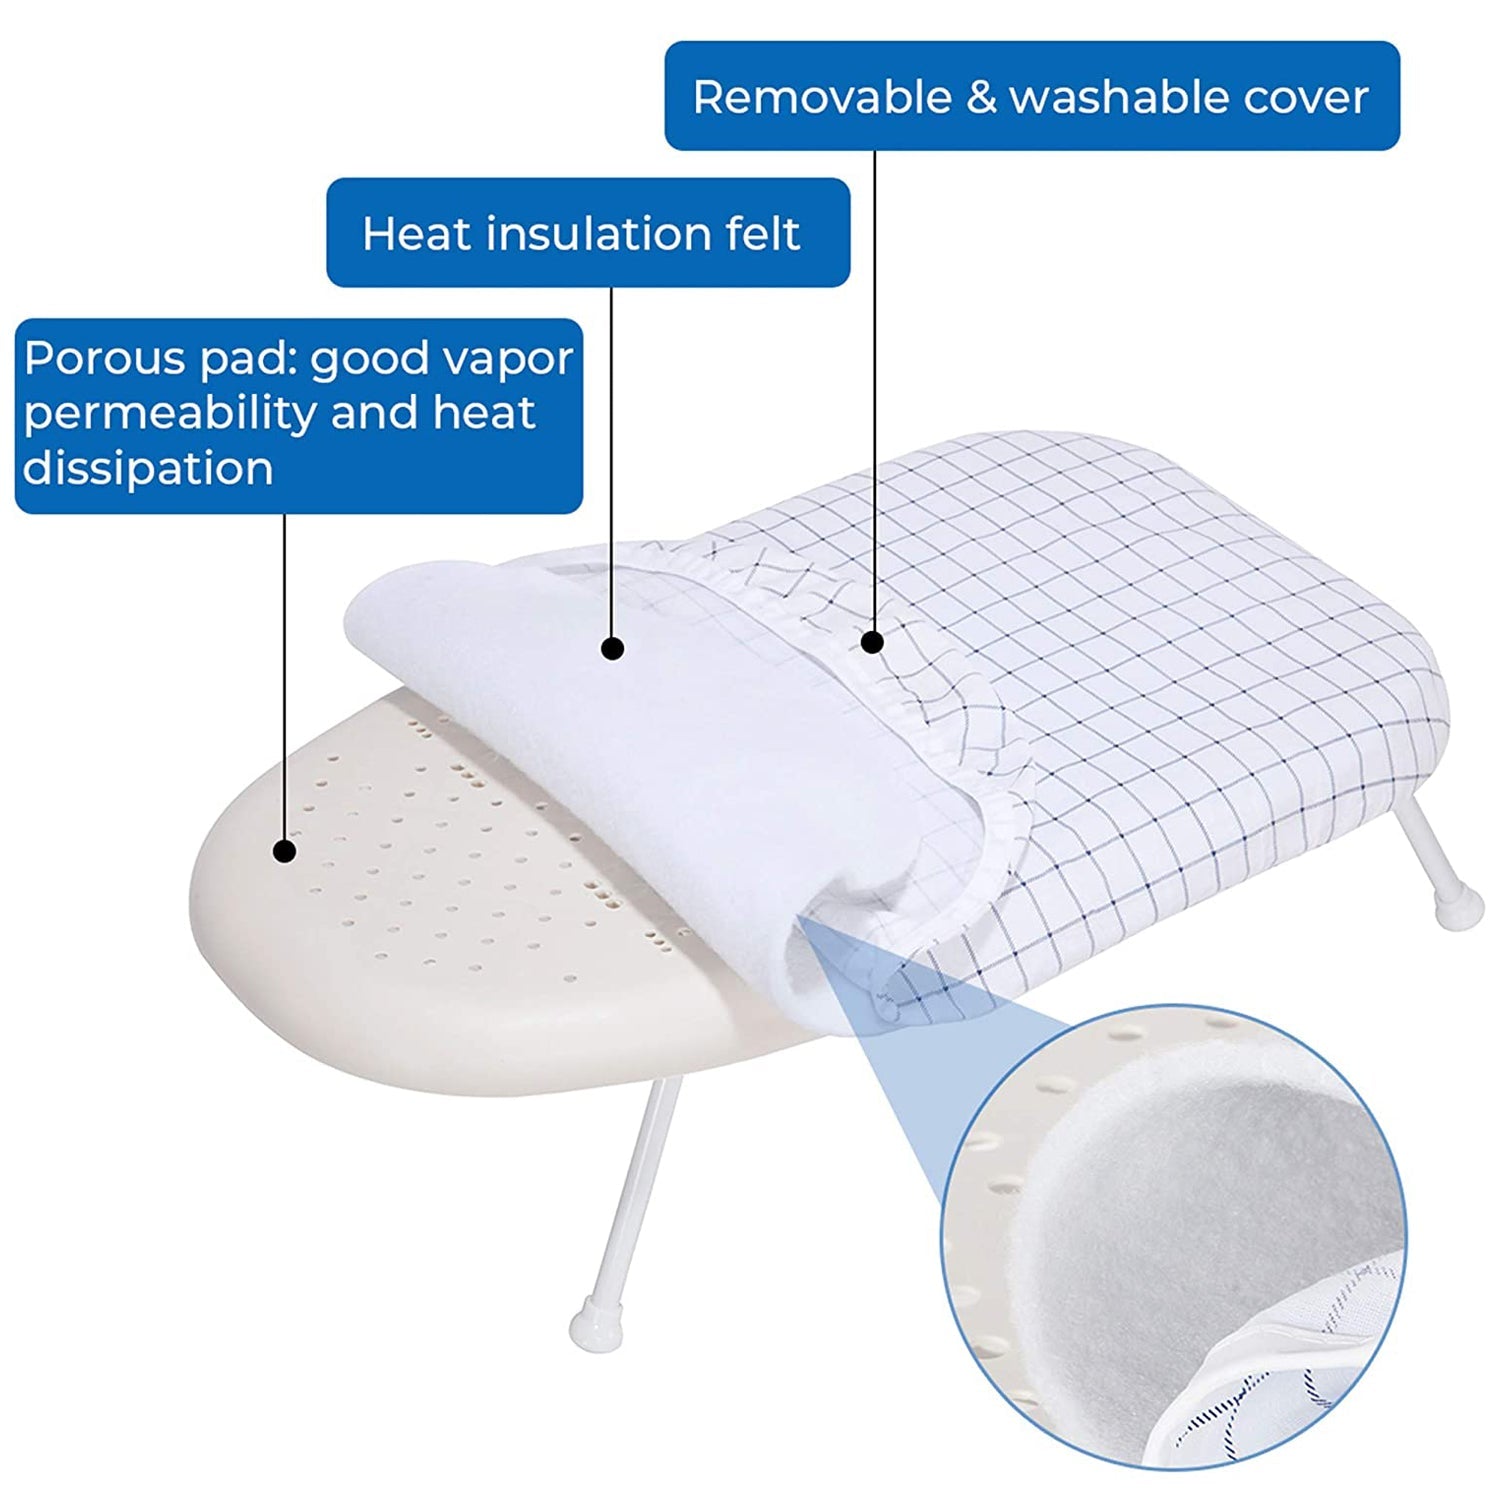 6081 Portable Ironing Pad used in all households and iron shops for ironing clothes and fabrics etc.